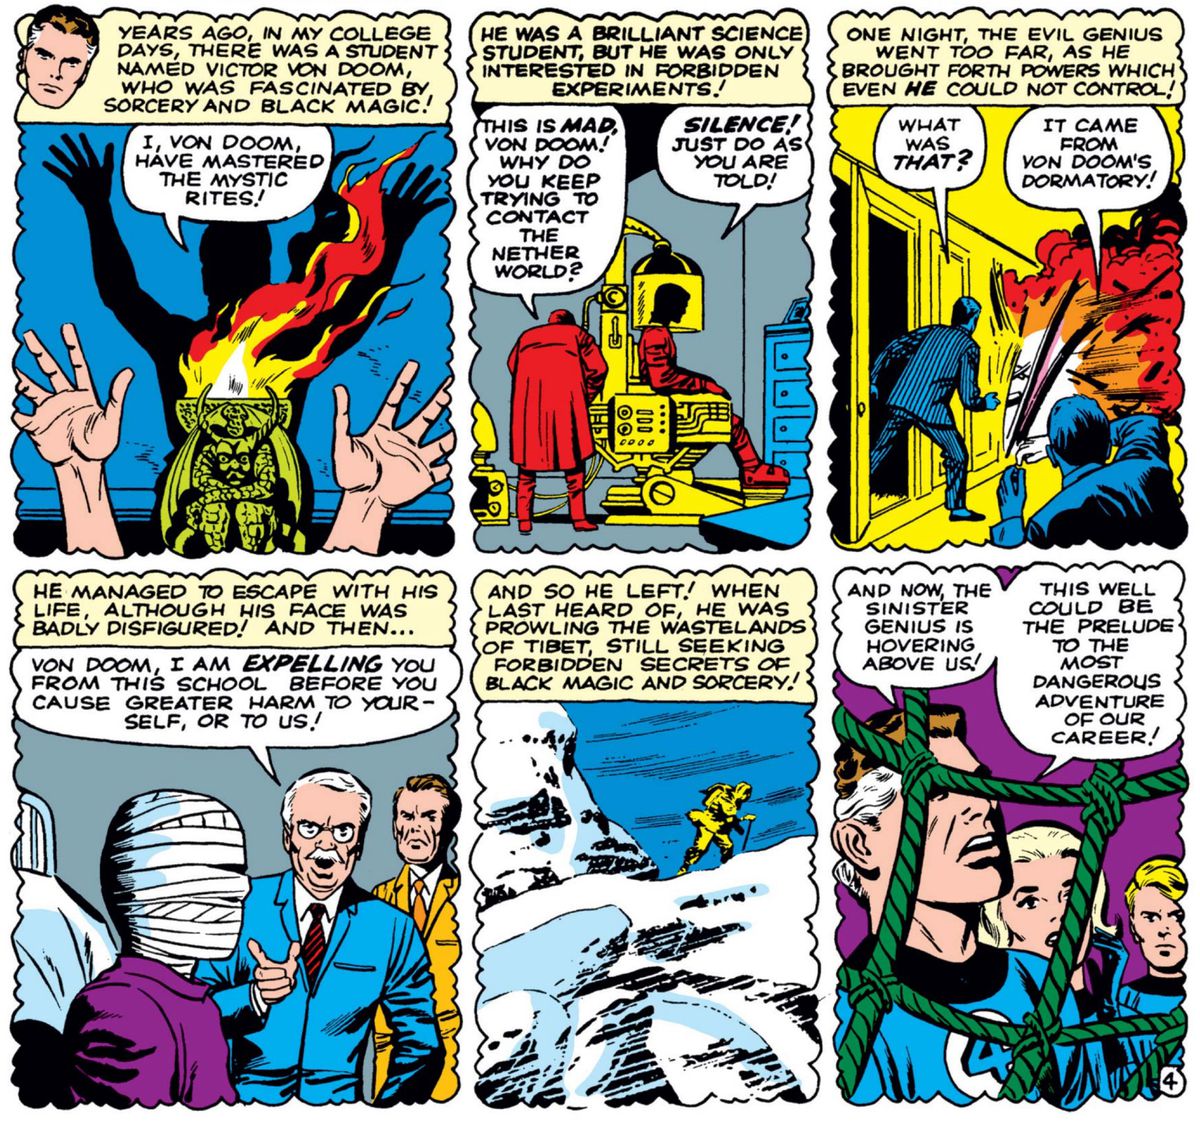 Six panels from Fantastic Four #5 show the origin story of Doctor Doom, who declares “I, Von Doom, have mastered the mystic rites!” before he puts himself in an elaborate scientific contraption to try to “contact the nether world,” which disfigures his face, and explodes his college dorm, for which he is expelled.